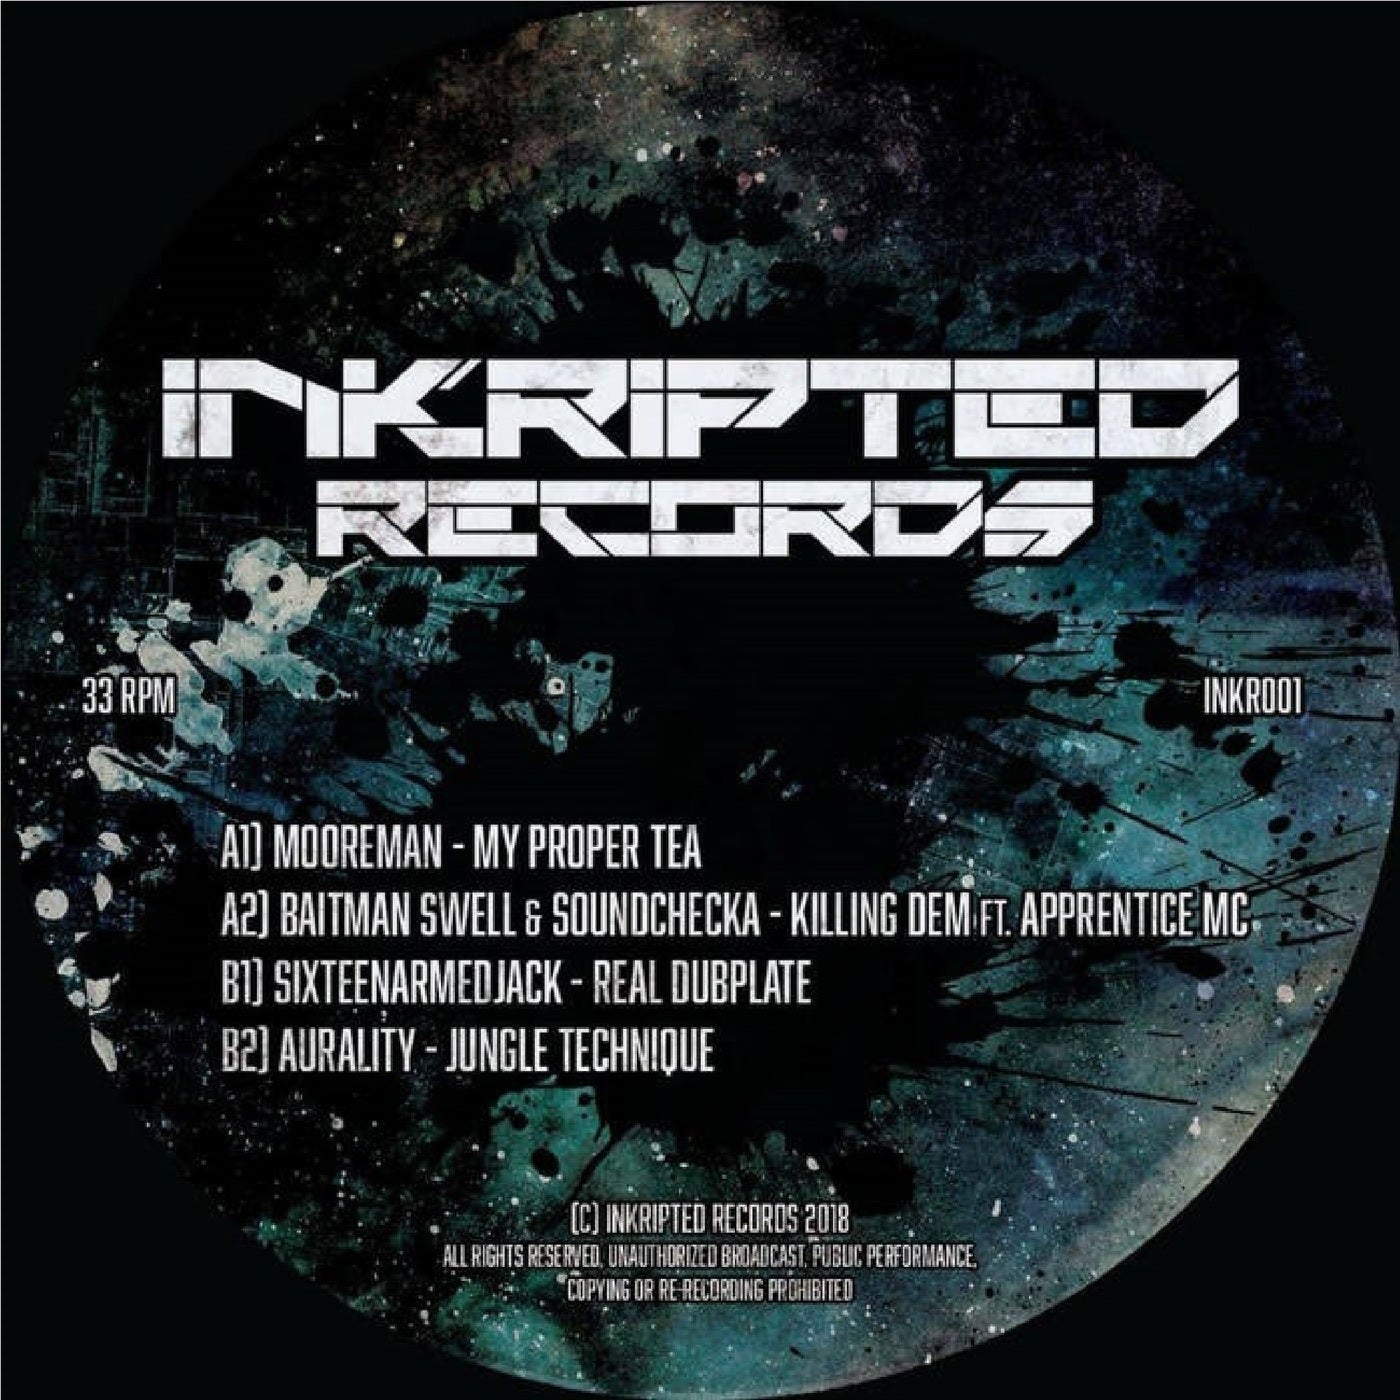 Inkripted Records